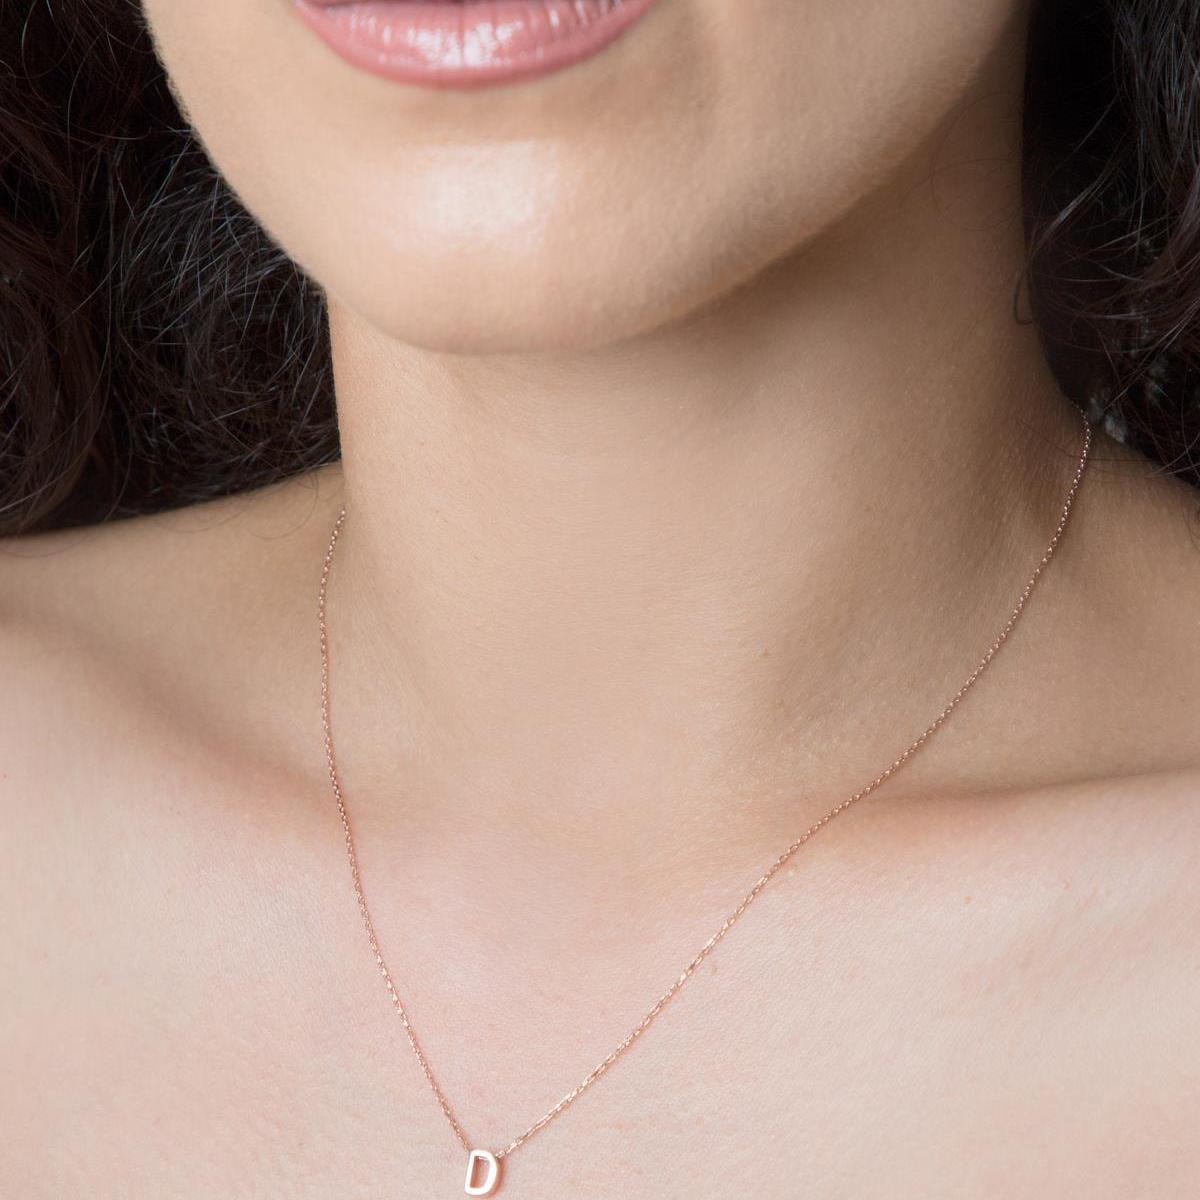 D Initial Necklace Rose • Rose Gold Initial Necklace • Gift For Her - Trending Silver Gifts